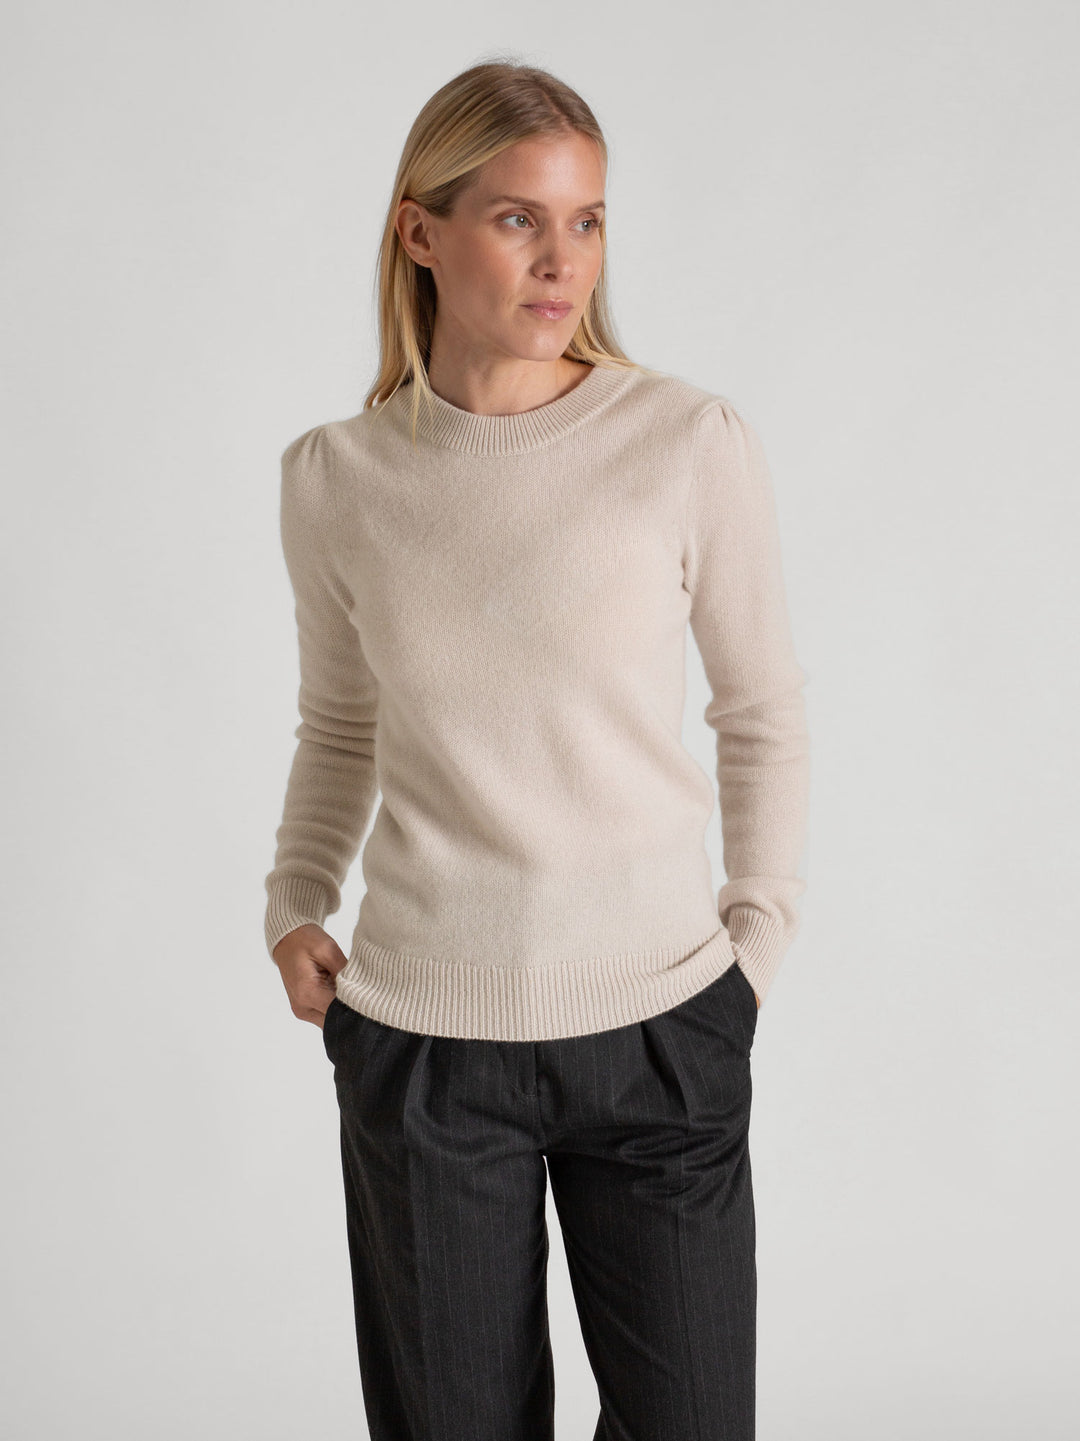 Cashmere sweater Lola in 100% cashmere by Kashmina